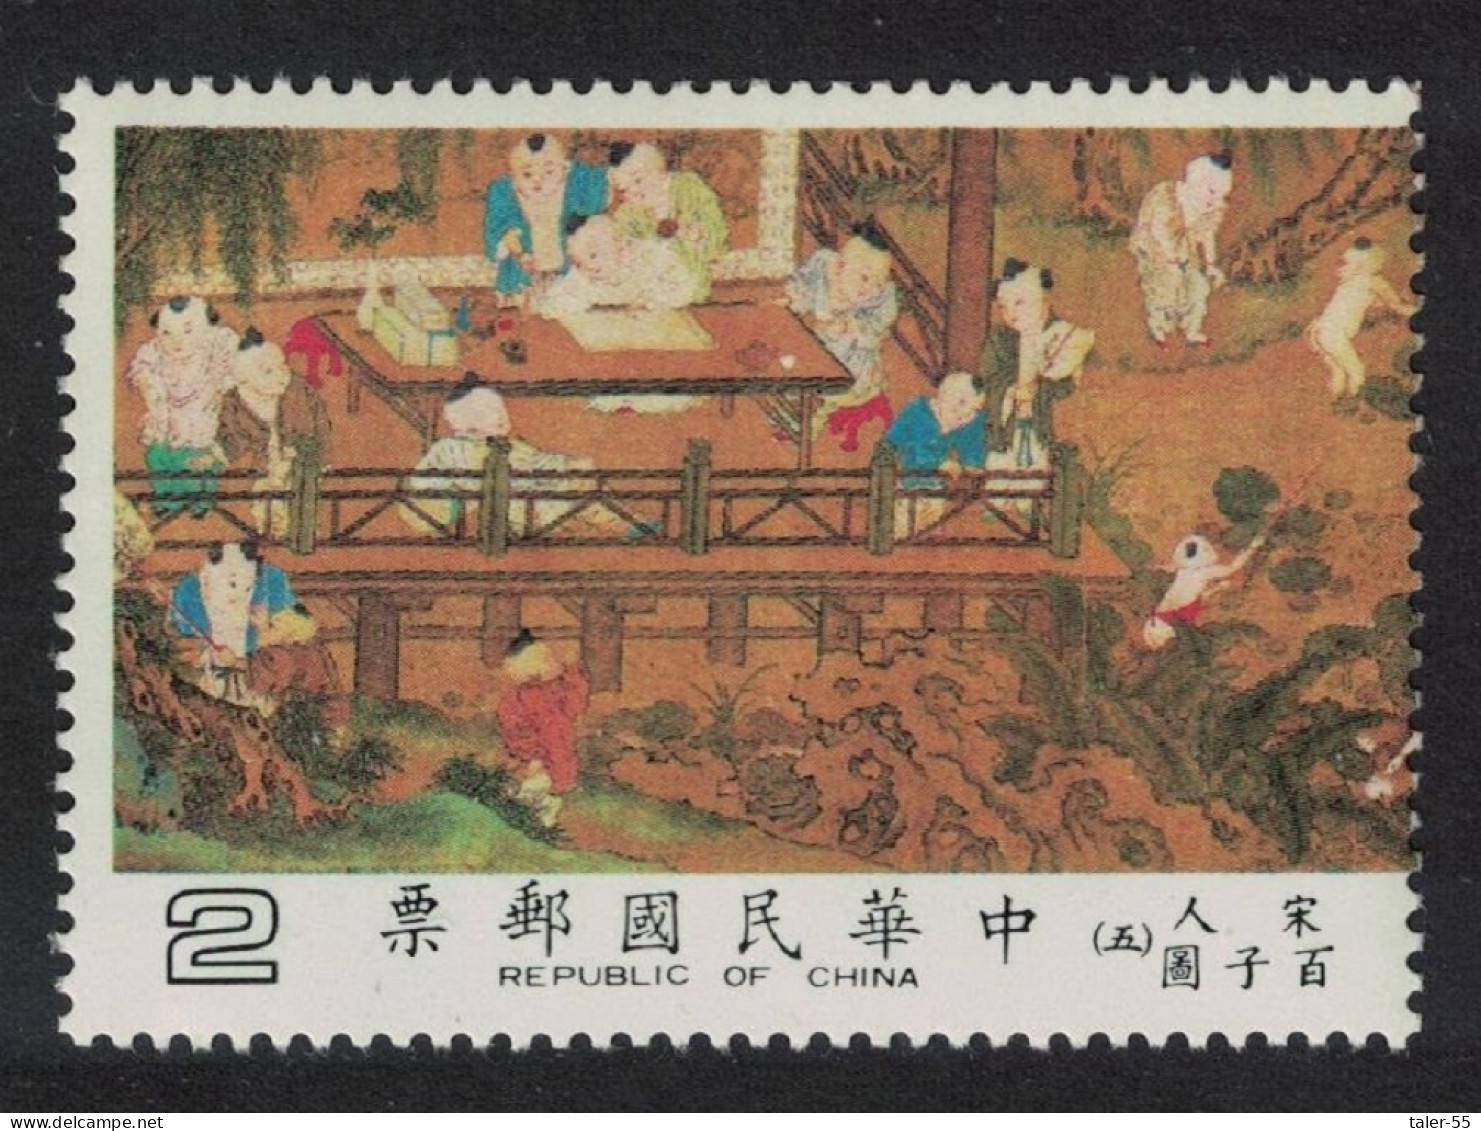 Taiwan Drawing Painting 'One Hundred Young Boys' $2 1981 MNH SG#1403 MI#1436 - Nuovi